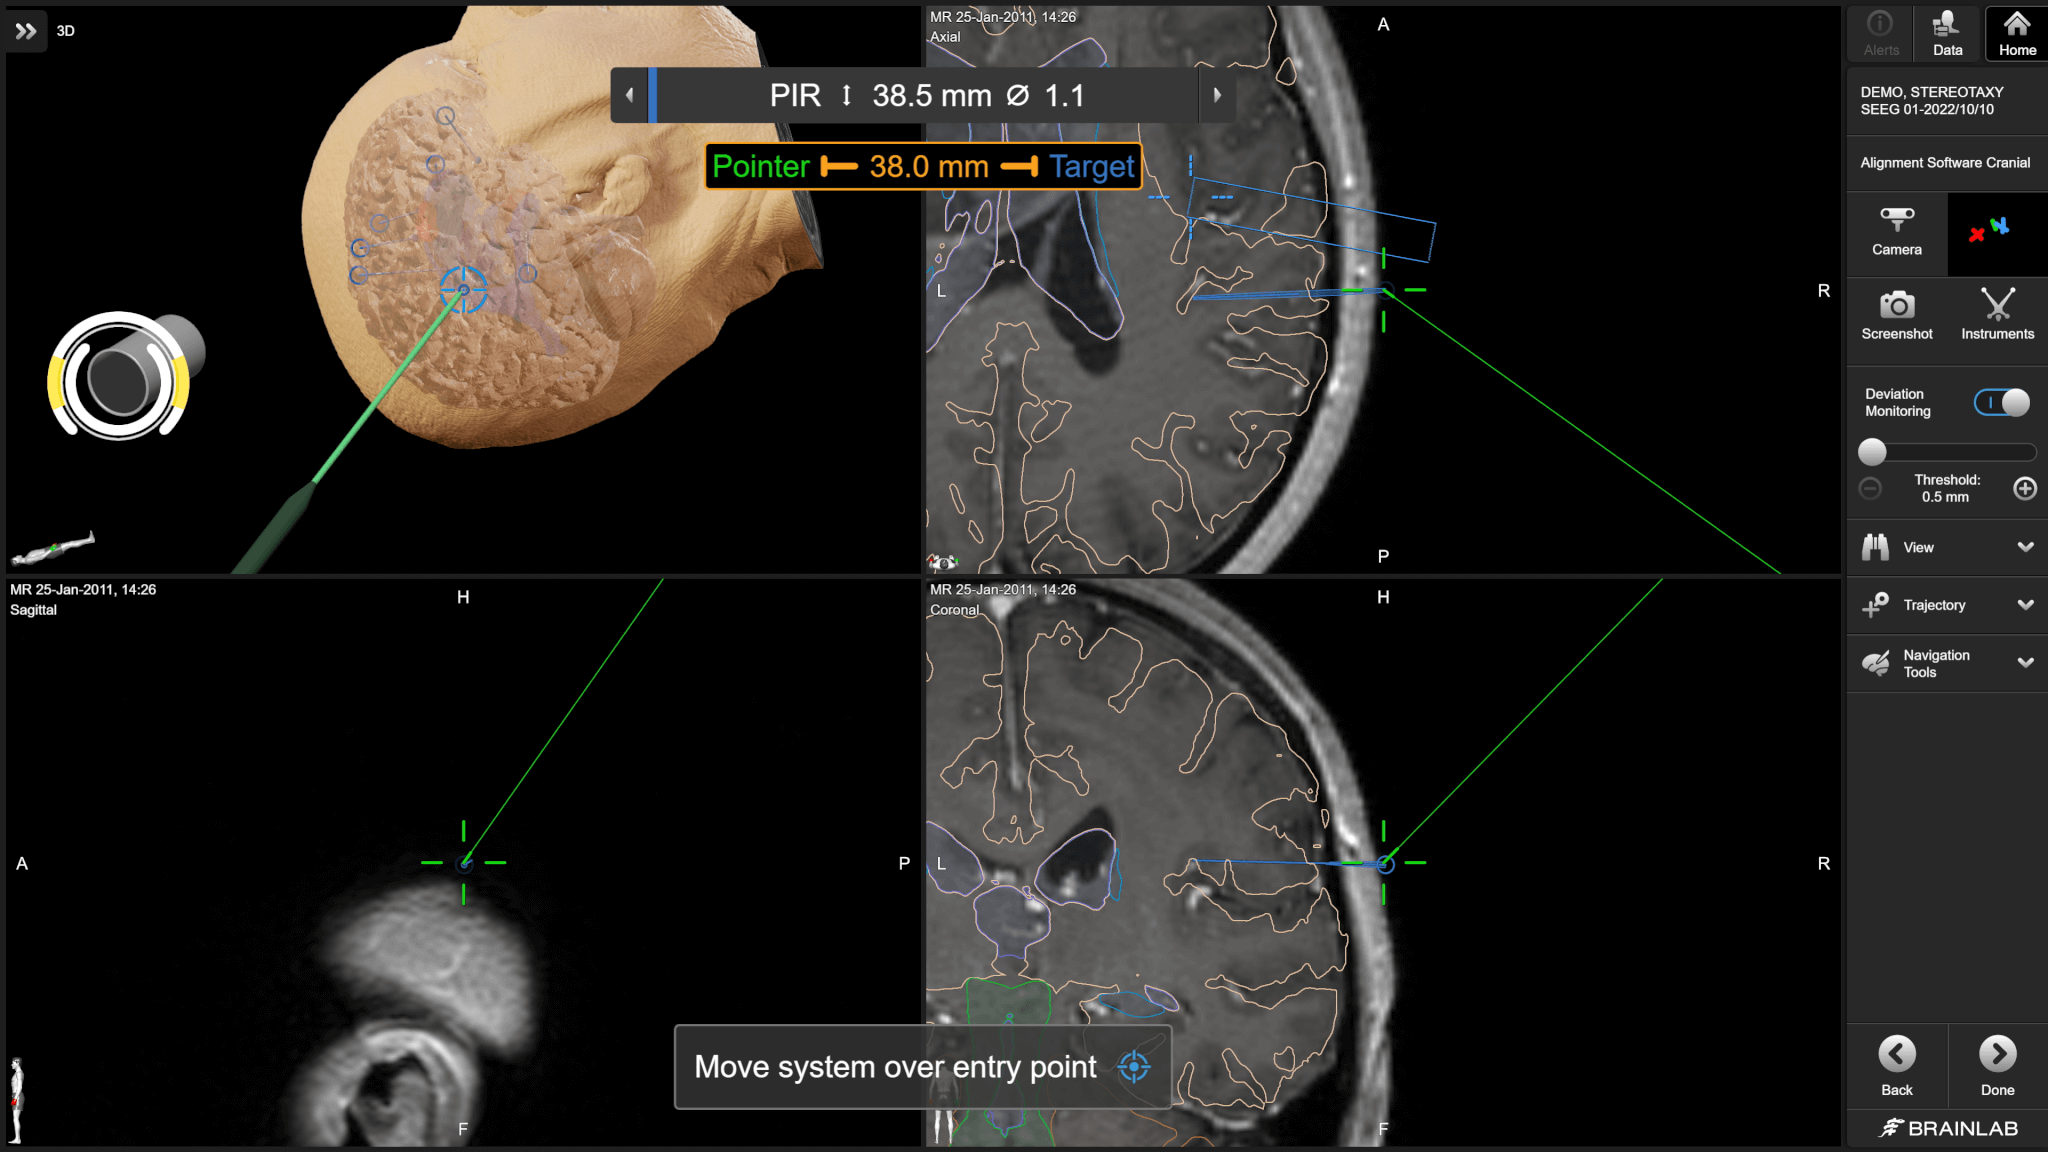 Touch-based rotation of microscope views to reveal more anatomical detail